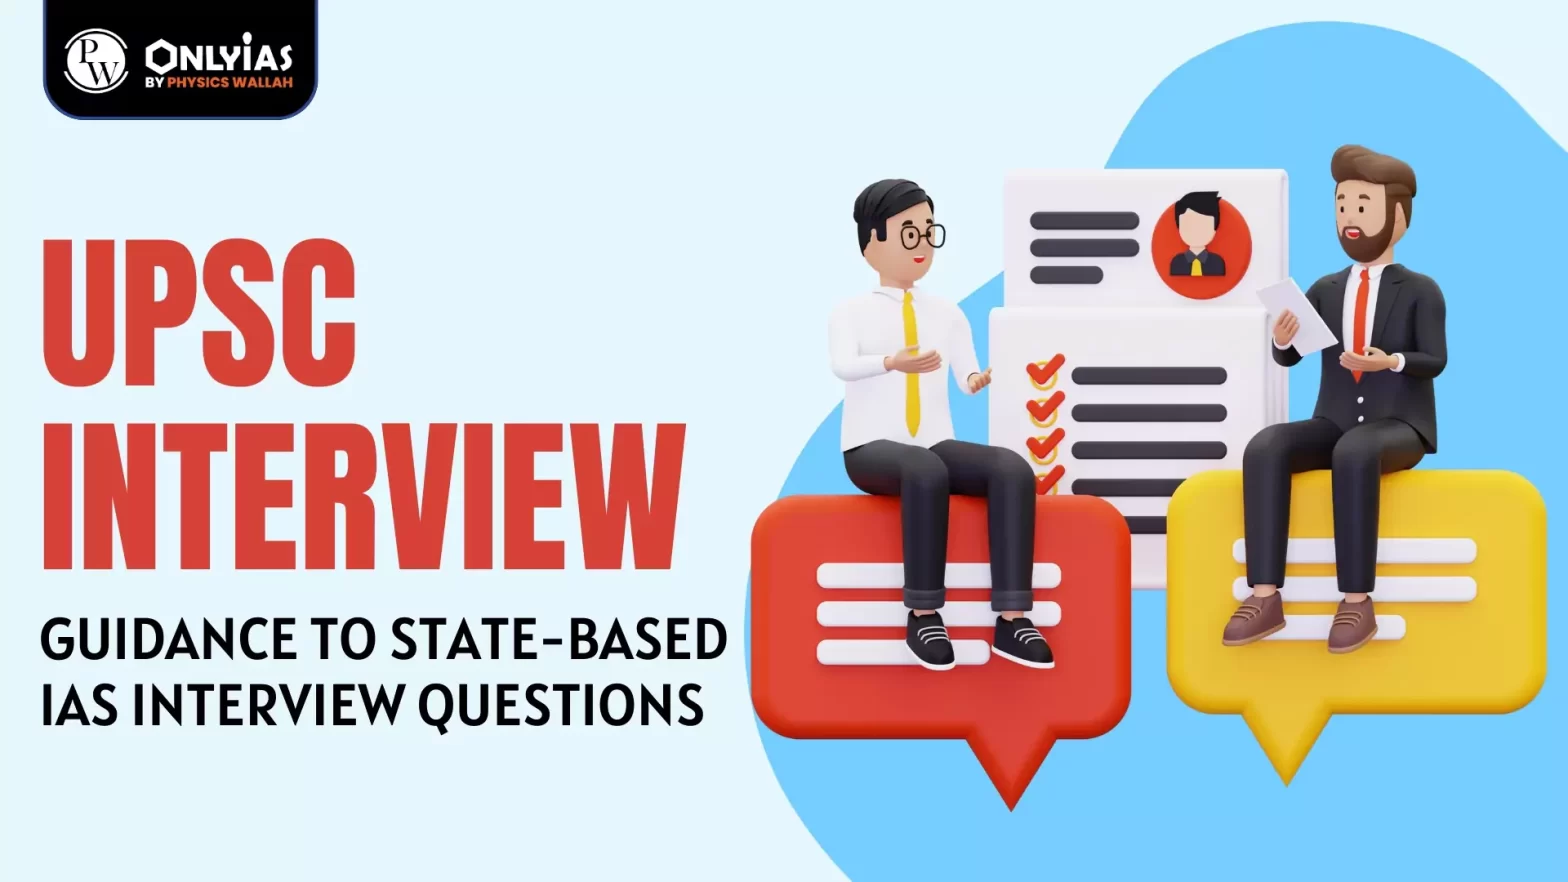 UPSC Interview: Guidance to State-Based IAS Interview Questions